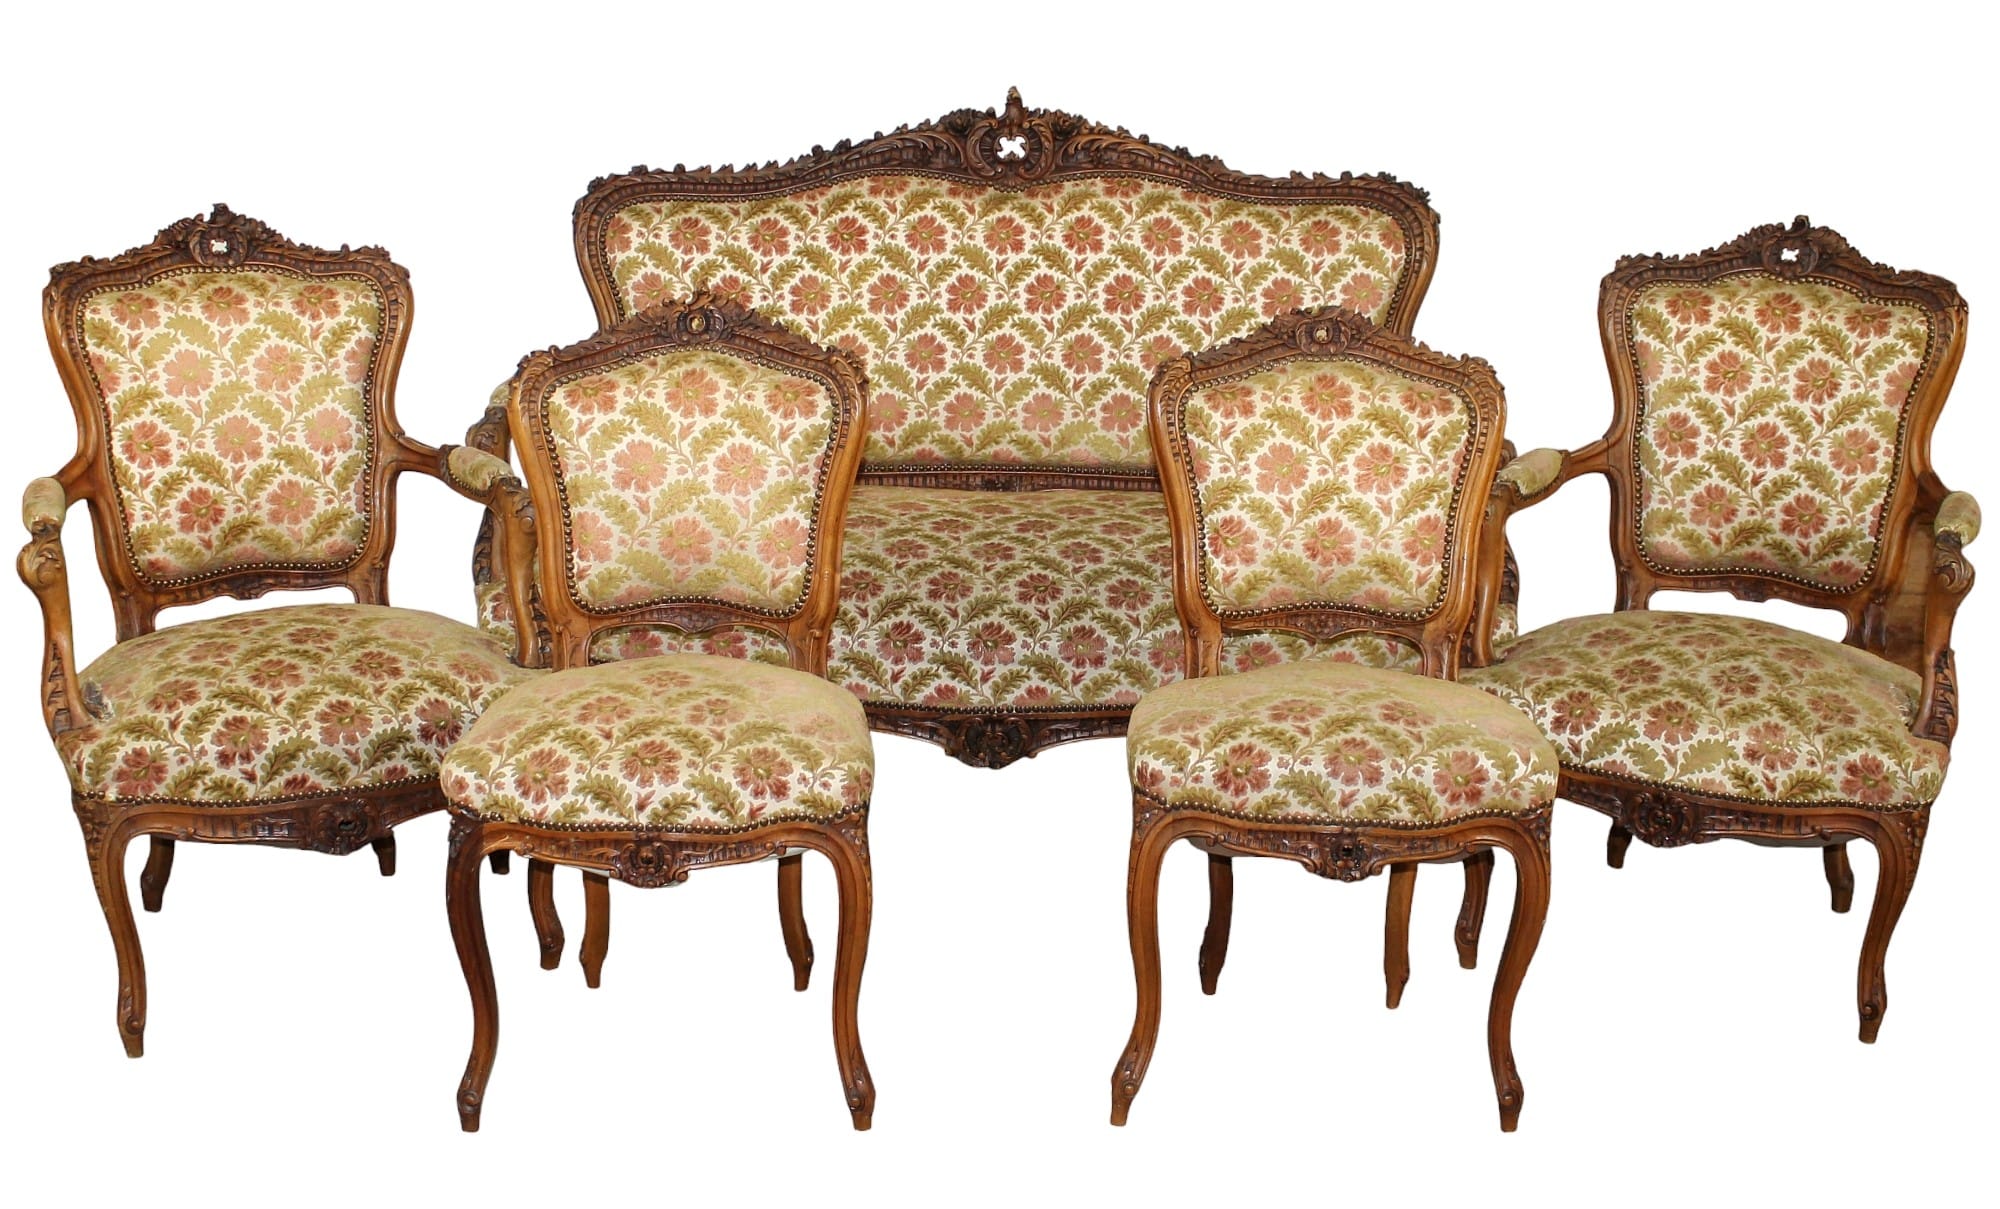 French Louis XV carved walnut 5 piece parlor set